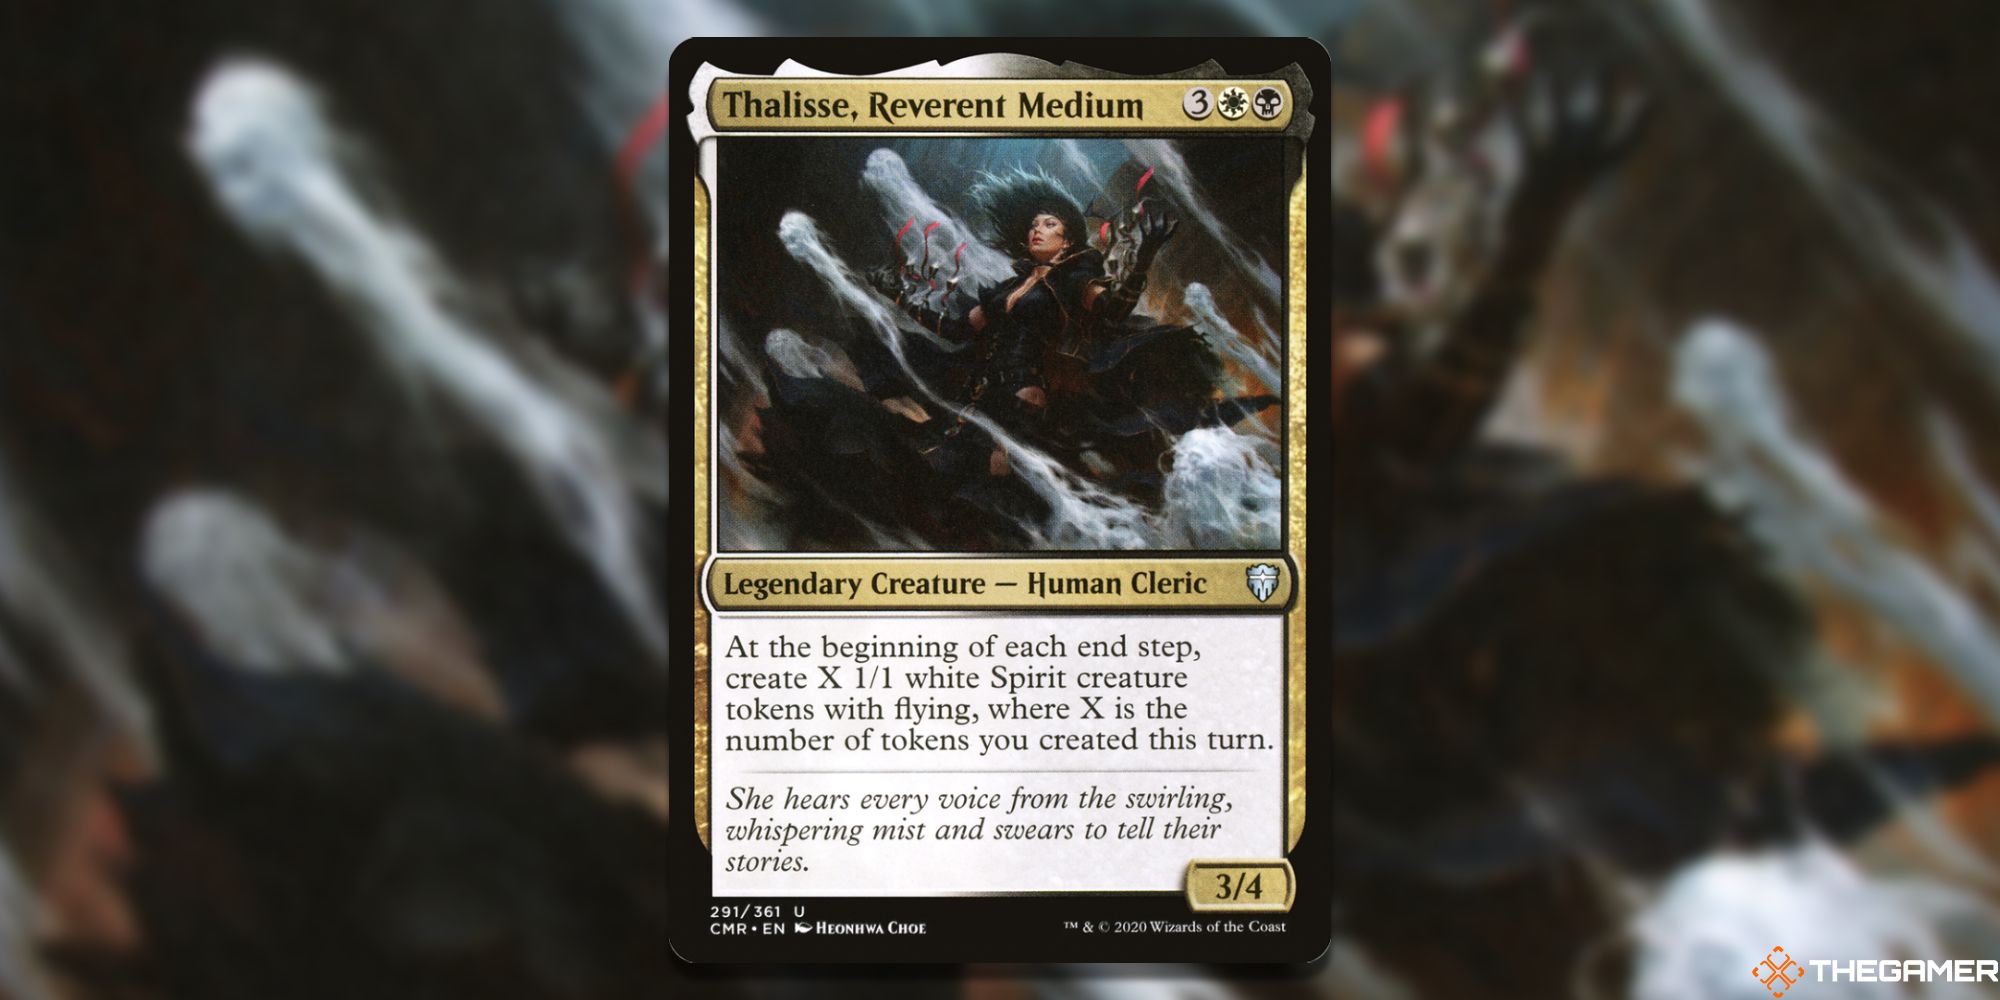 Image of the Thalisse, Reverent Medium card in Magic: The Gathering, with art by Heonhwa Choe